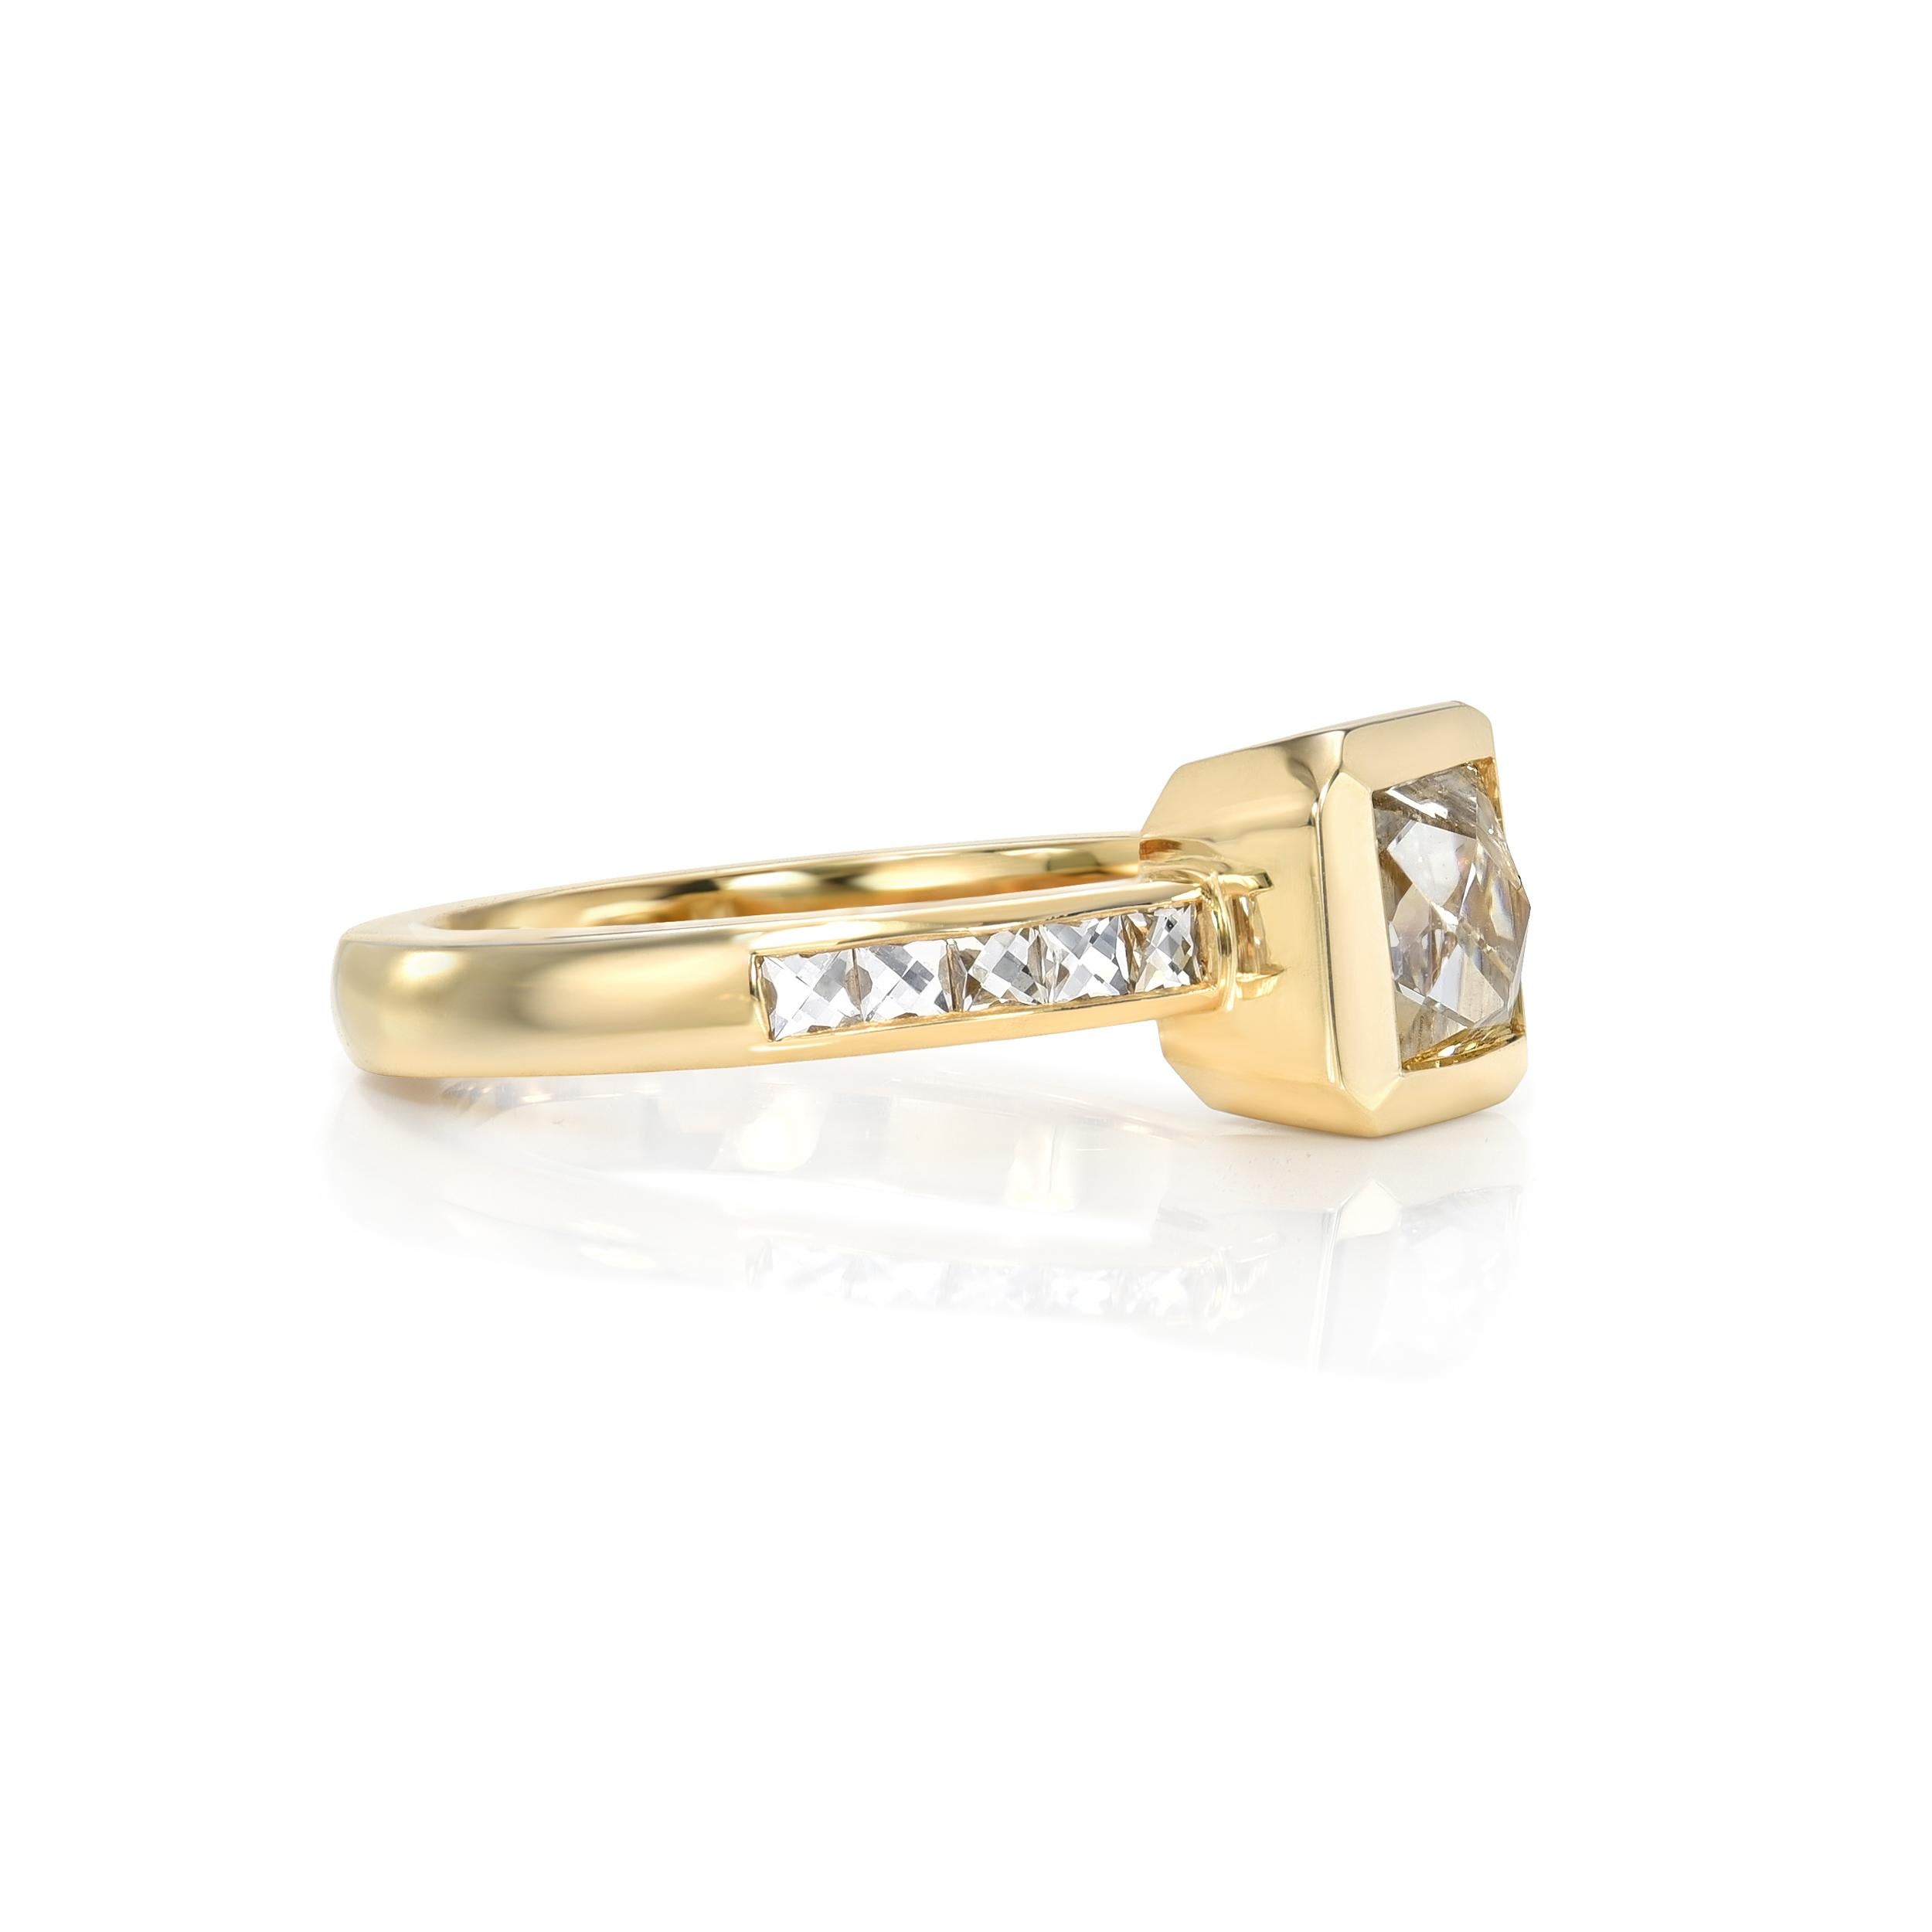 1.24ct G/I1 GIA certified French cut diamond with 0.25ctw French cut accent diamonds set in a handcrafted 18K yellow gold mounting.

 